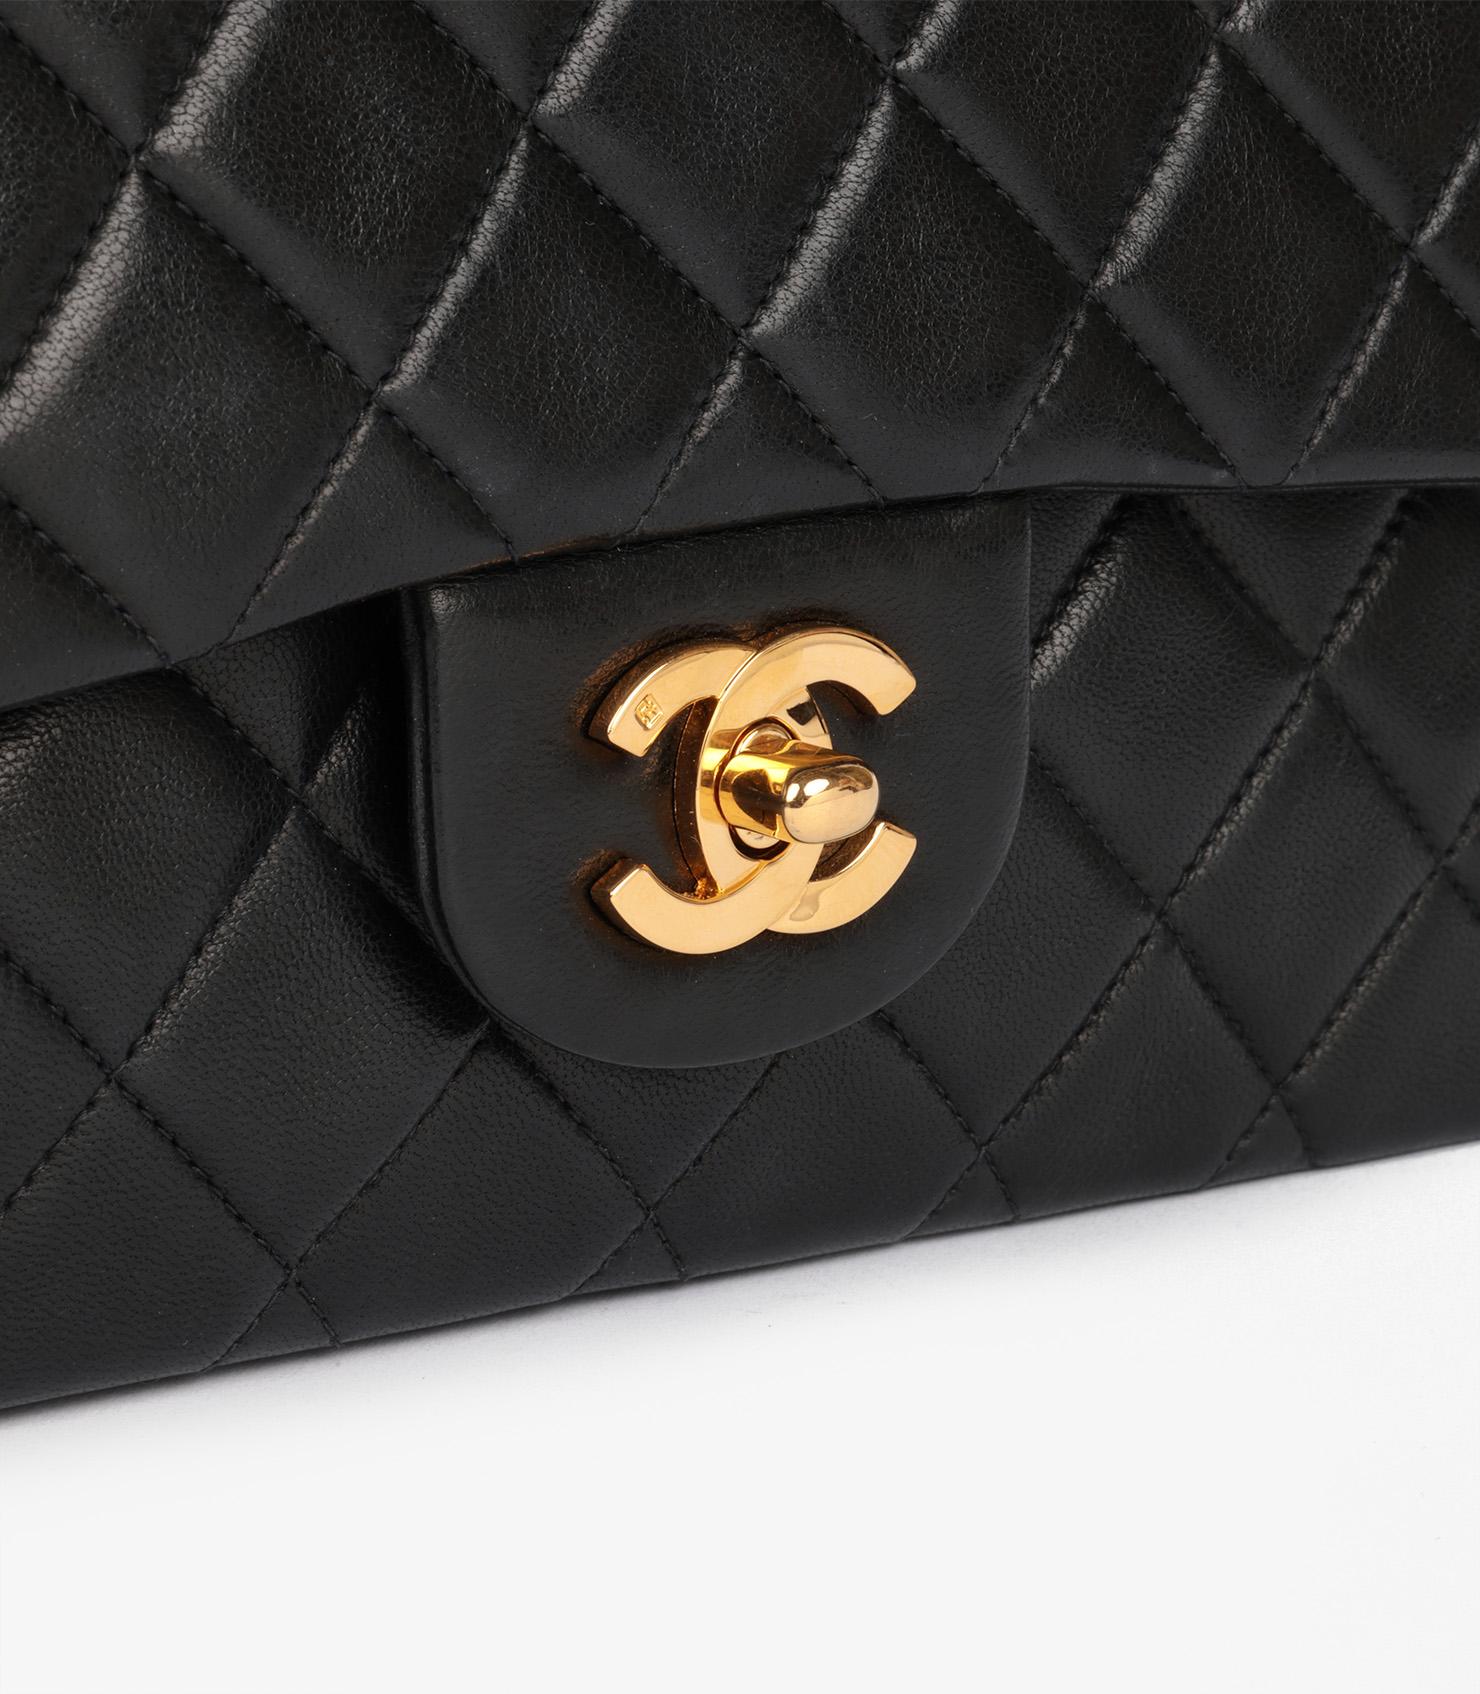 Chanel Black Quilted Lambskin Vintage Small Classic Double Flap Bag For Sale 3